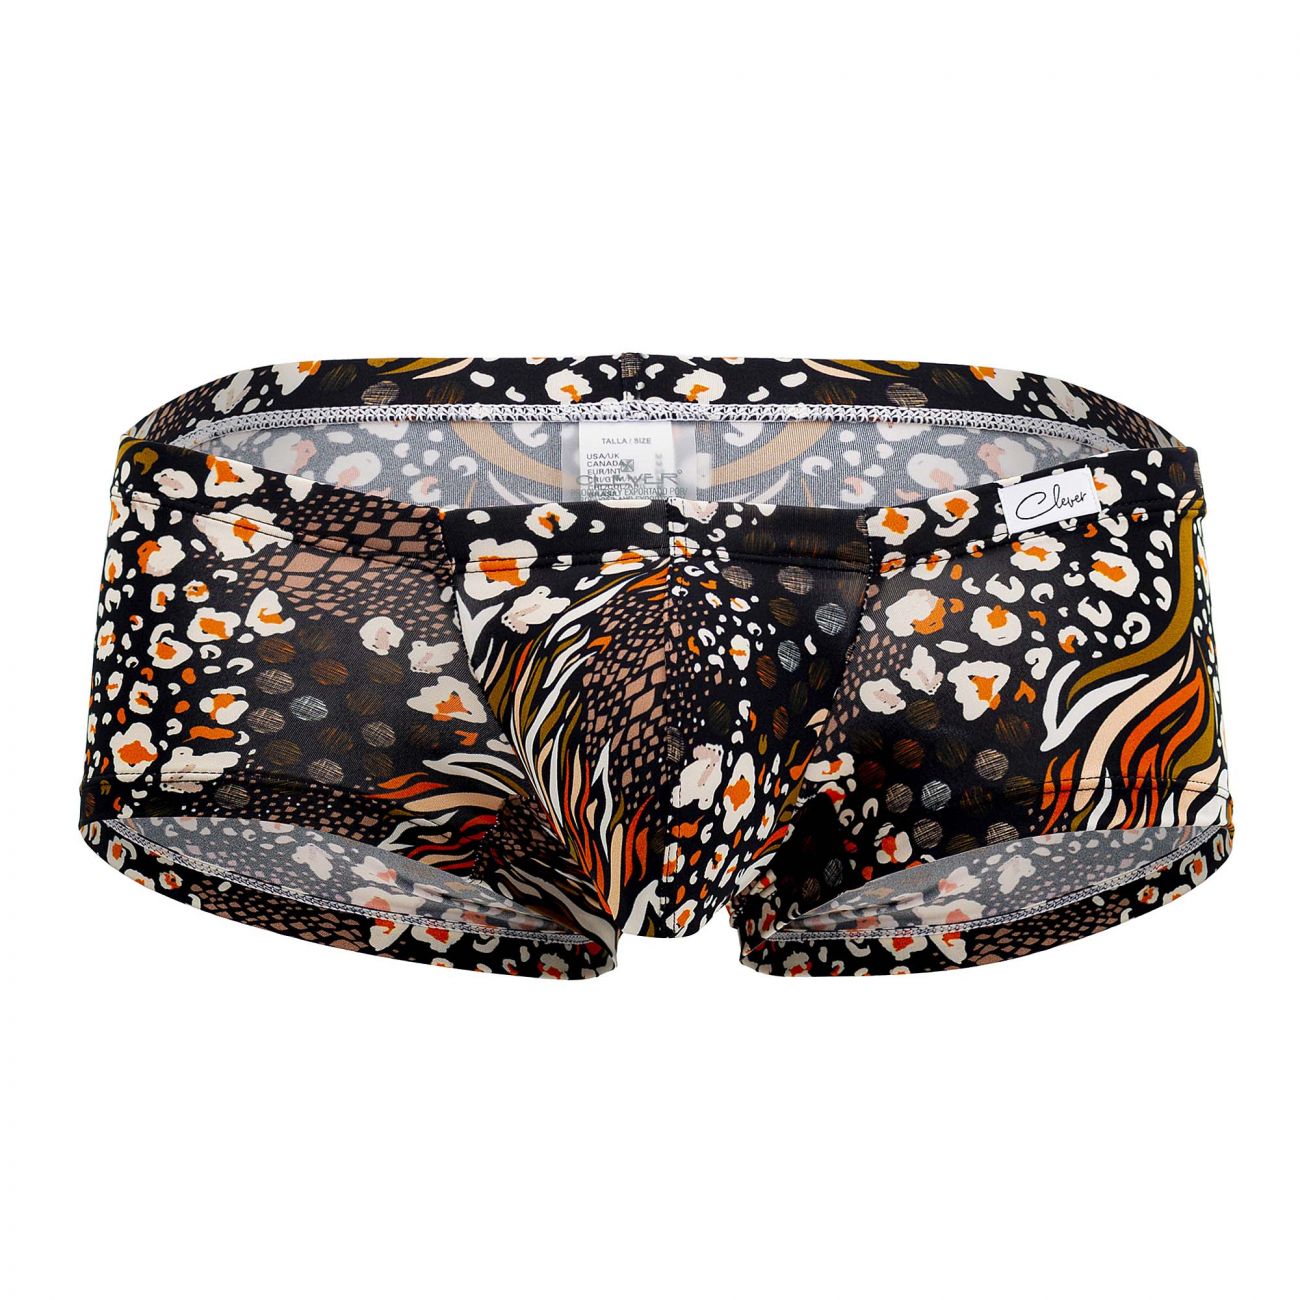 Clever 0573-1 Wild Trunks Black Printed